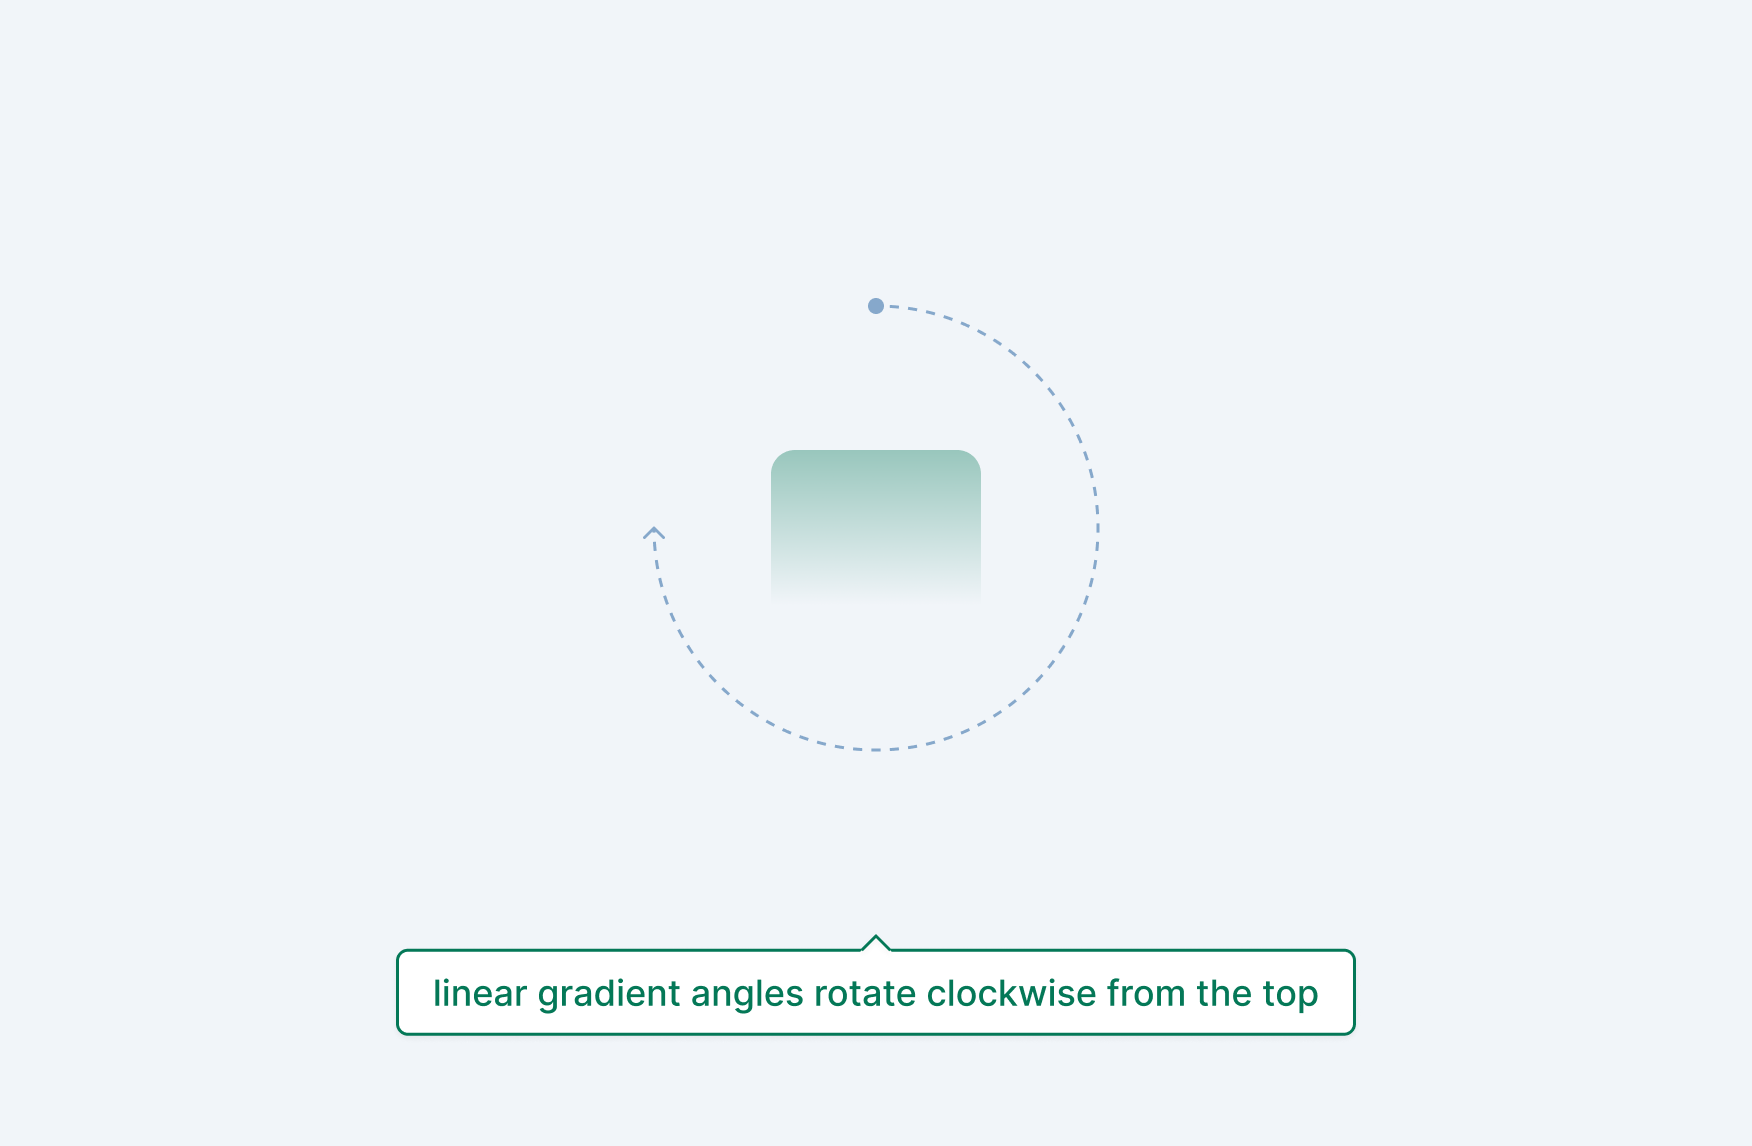 Linear gradient angles rotate clockwise from the top